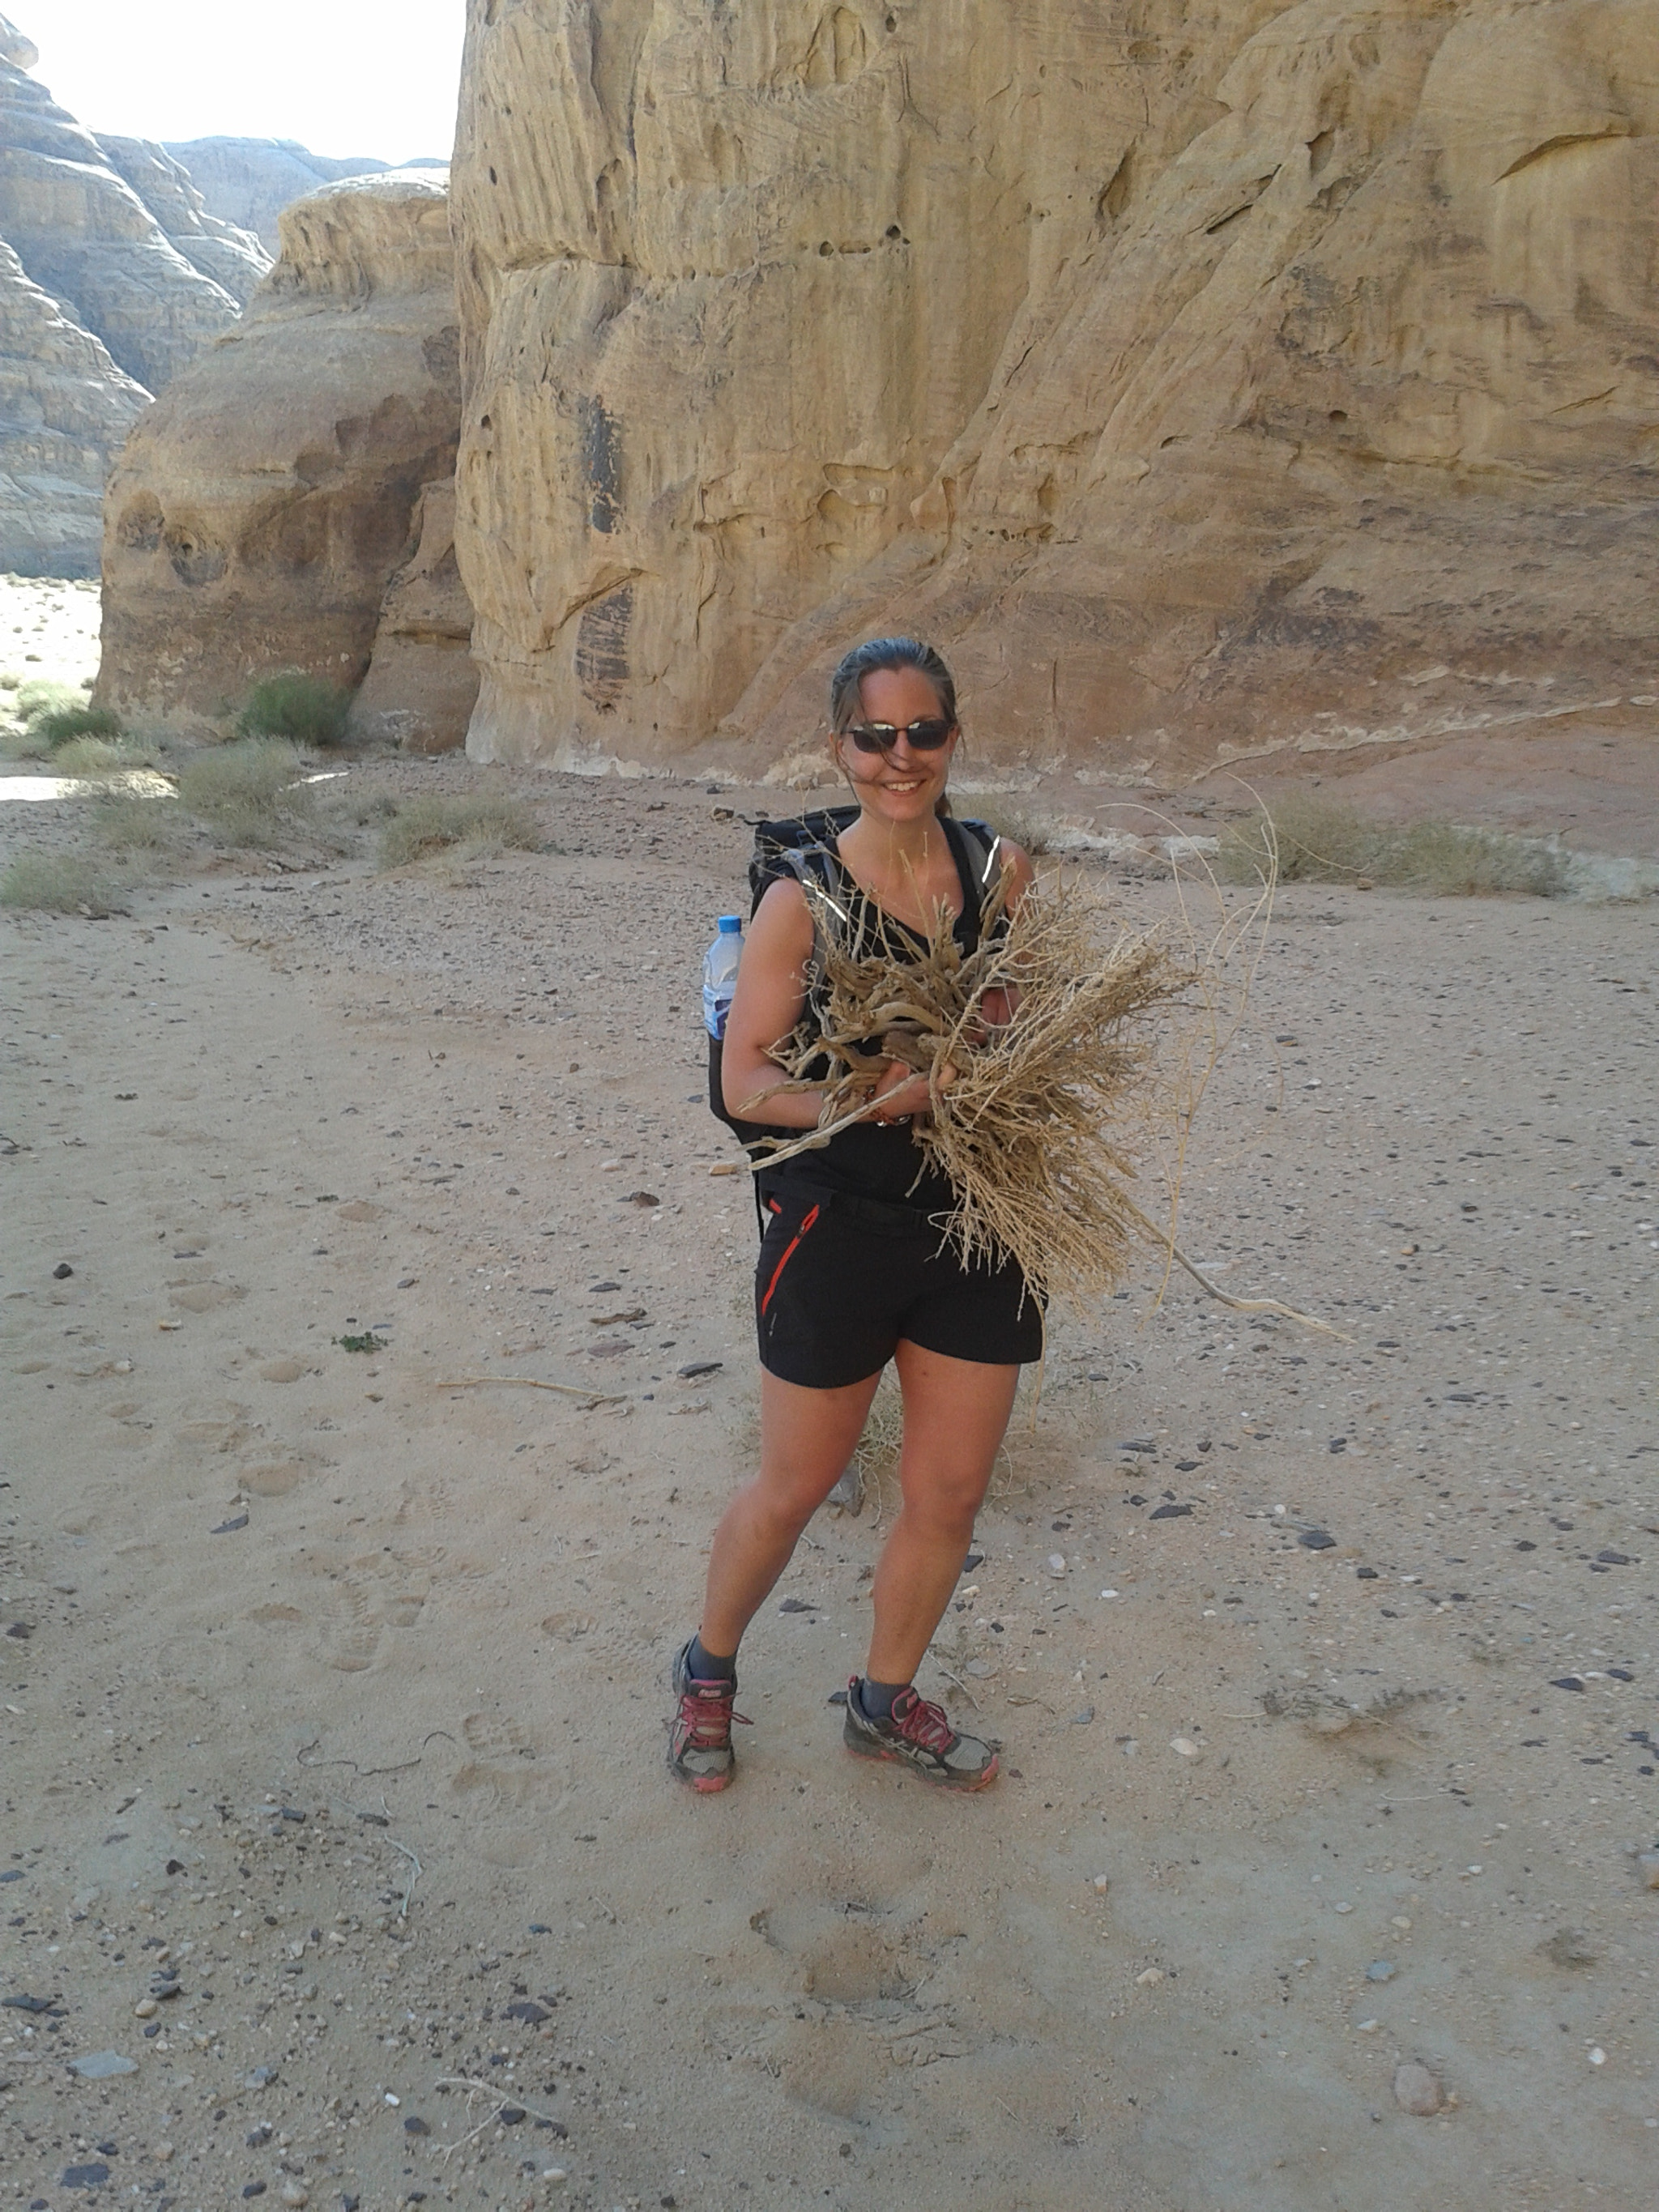 Samsung Galaxy Fame sample photo. Laure friendly from france while collecting firewood in the jordanian desert photography